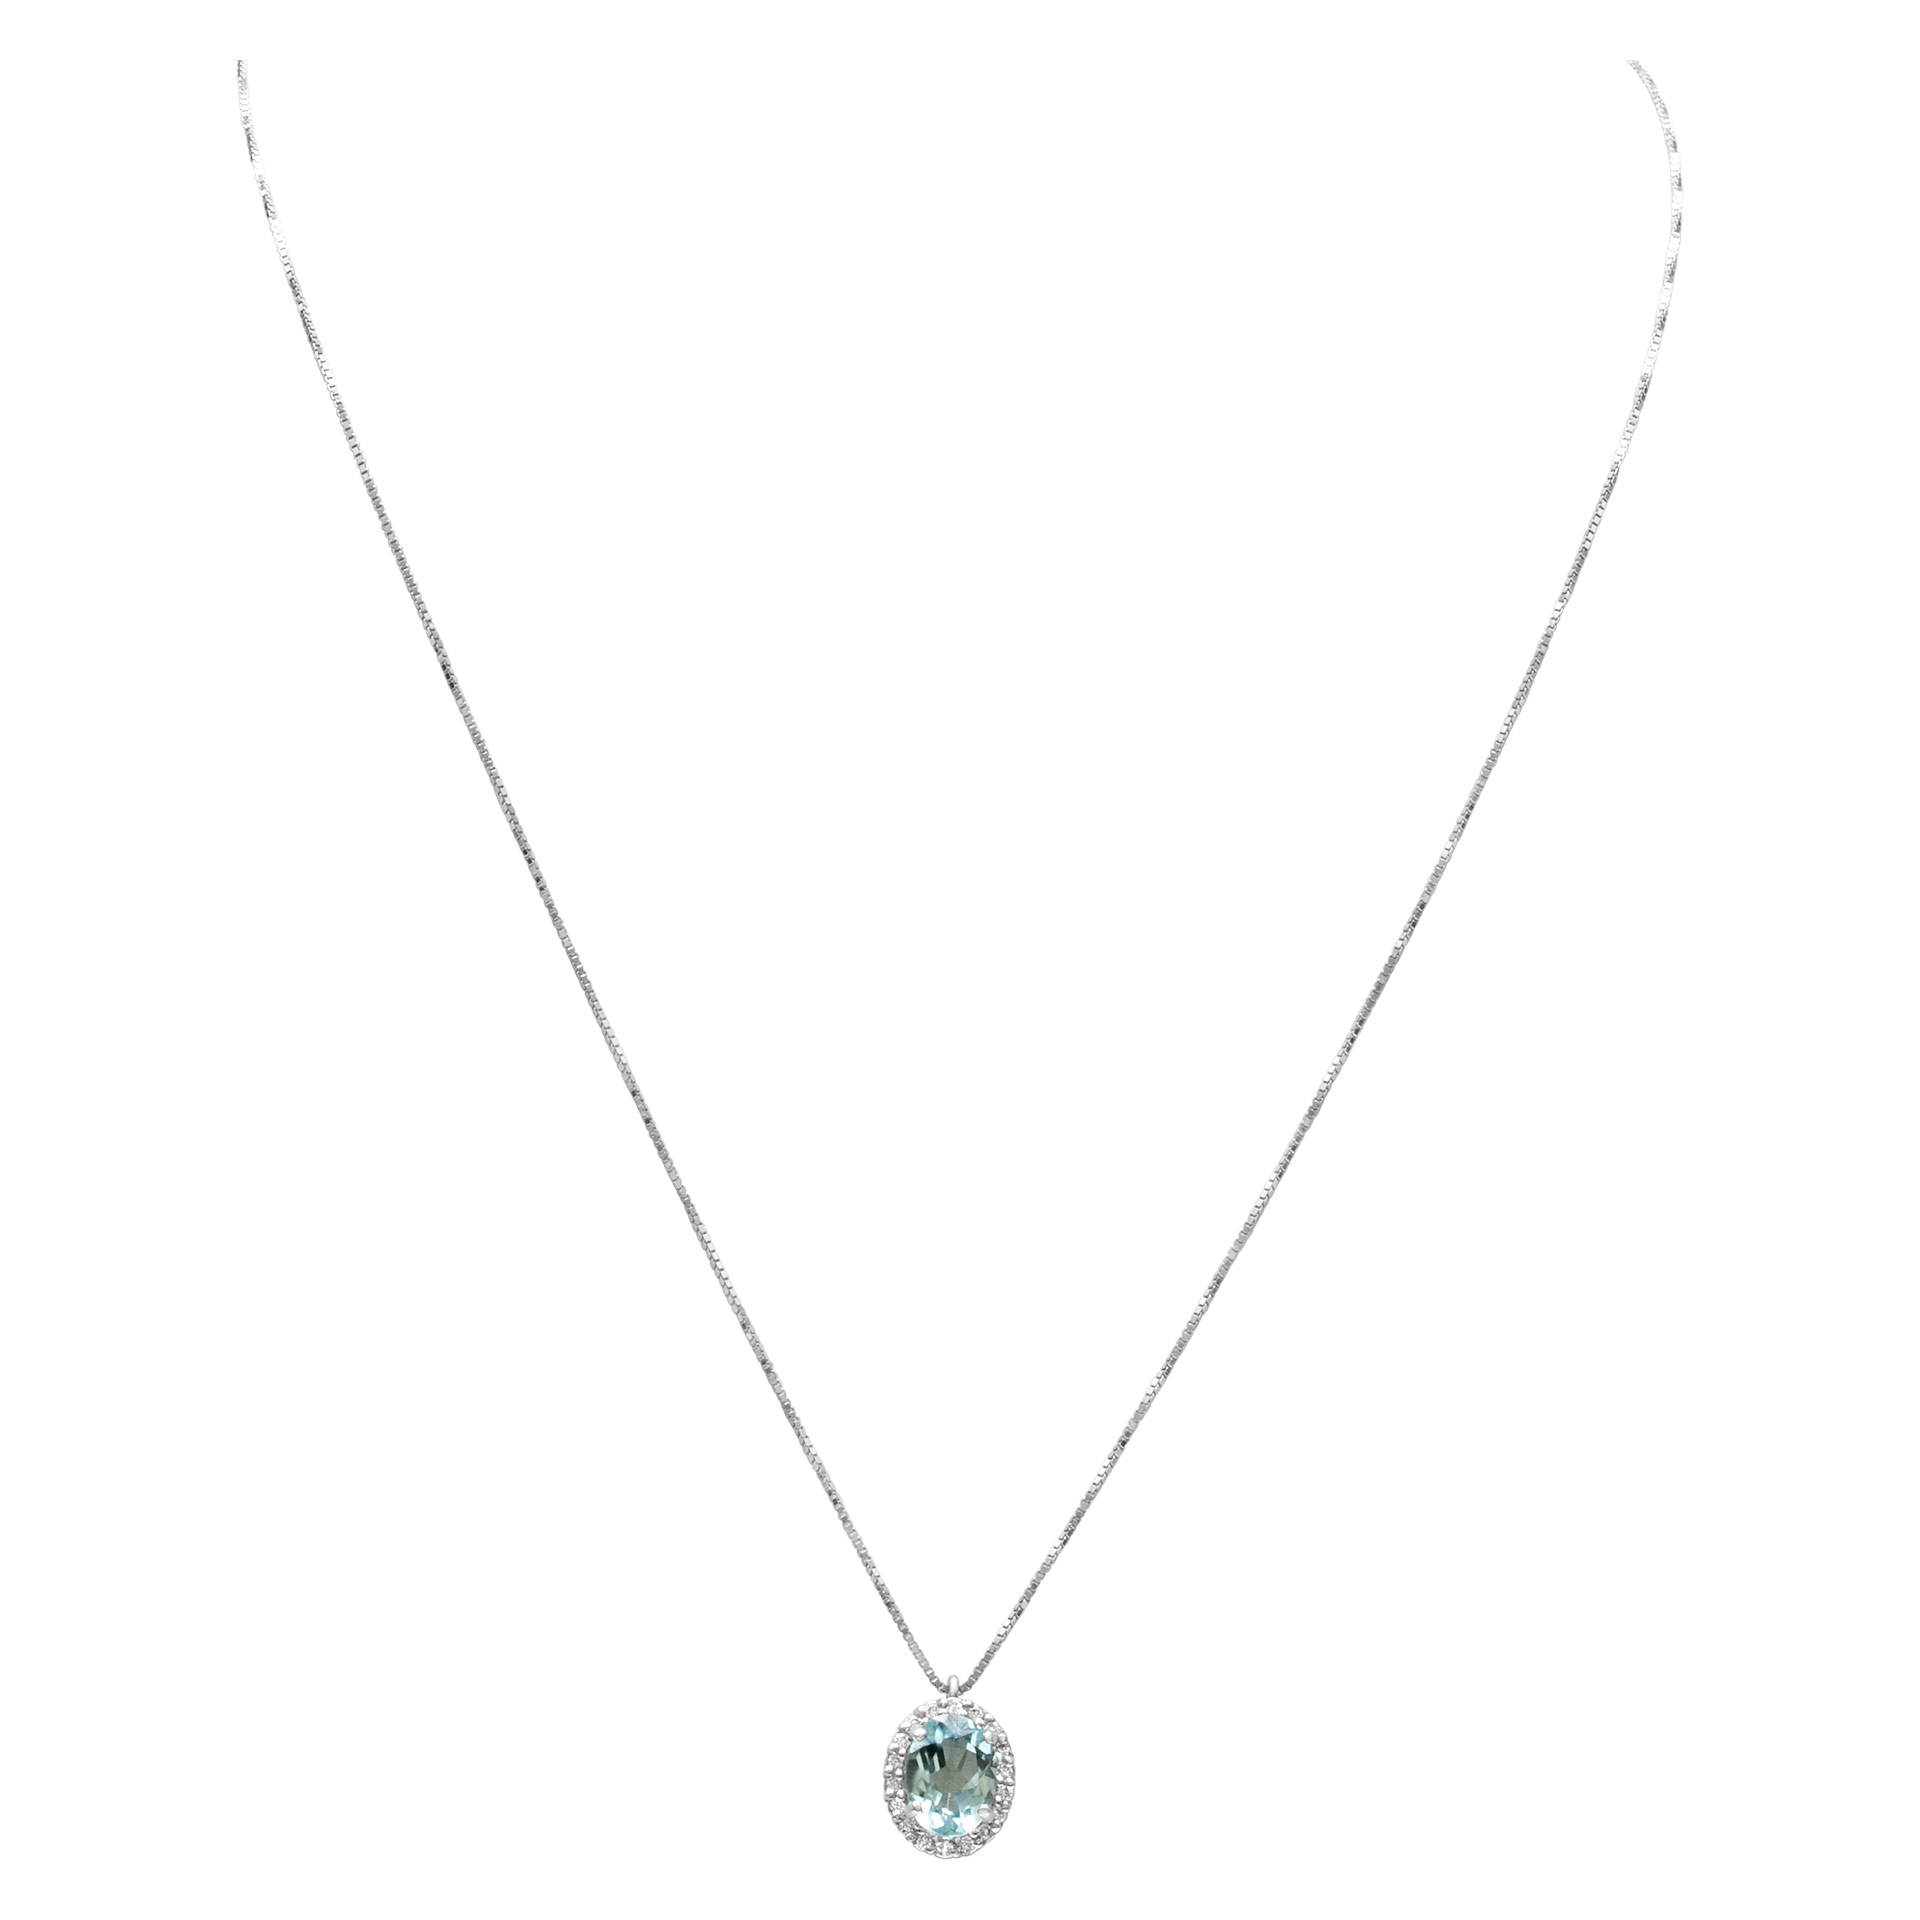 Cute oval Aquamarine pendant with 0.14 cts in diamond accents in 18k white gold image 2